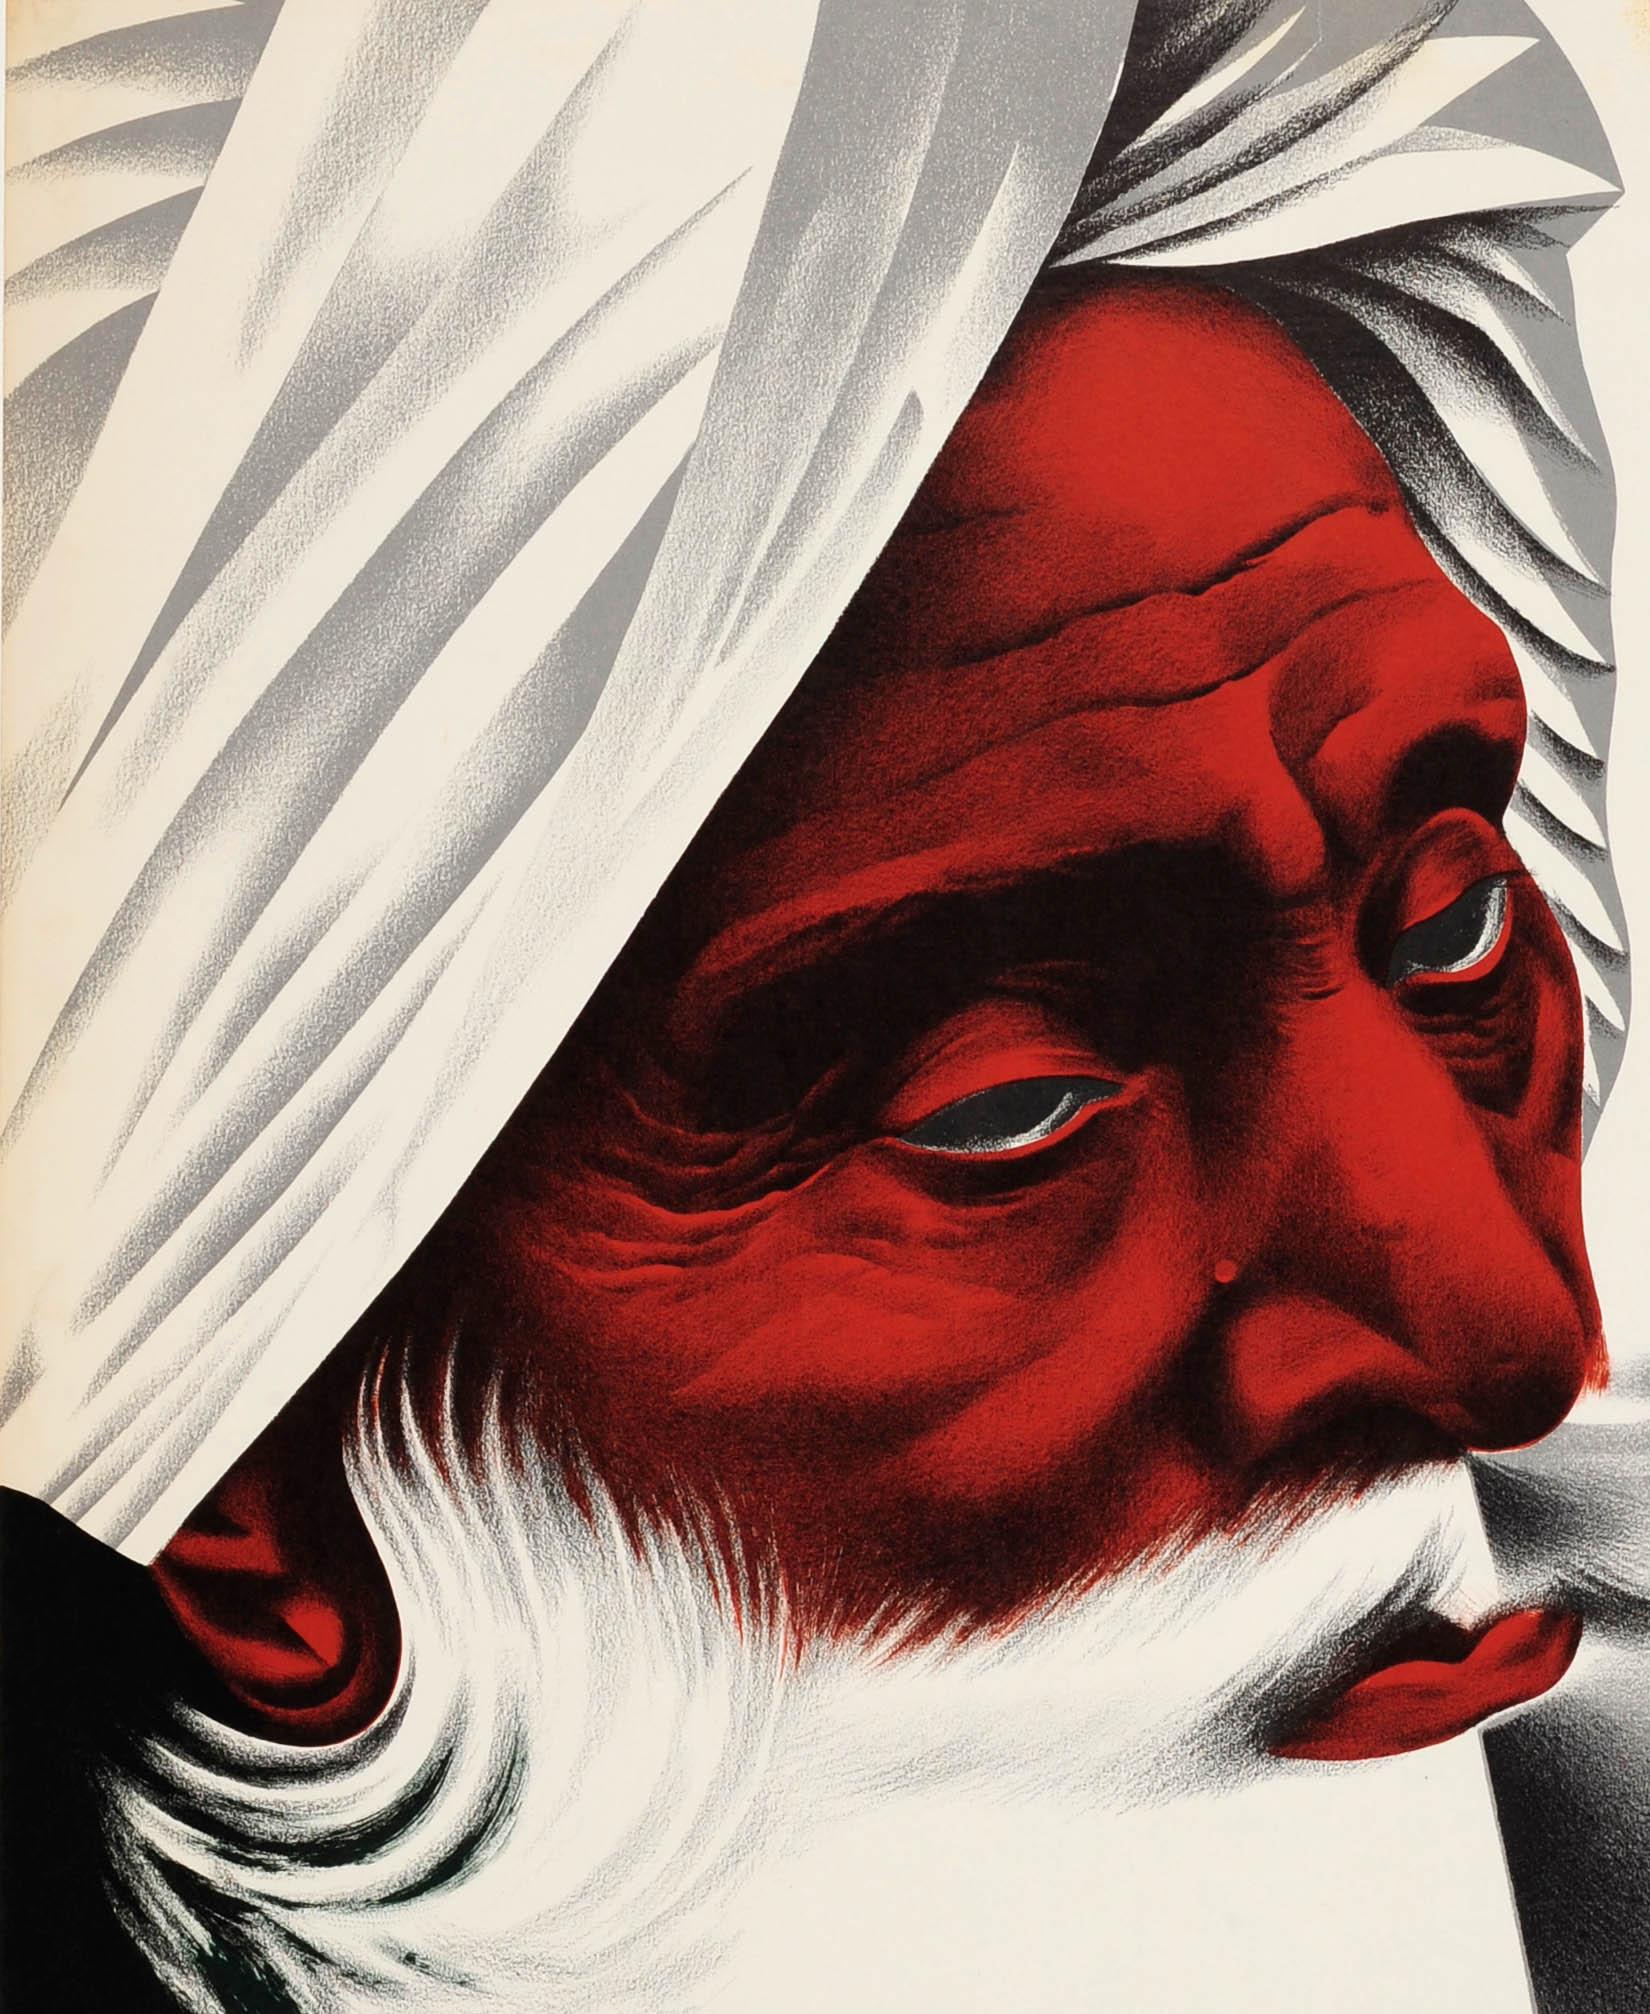 Original vintage travel poster advertising cruise trips to Bombay (now Mumbai) in India by American President Lines featuring a man in a turban with a thick white beard against a yellow background, a cruise liner ship sailing between the title text